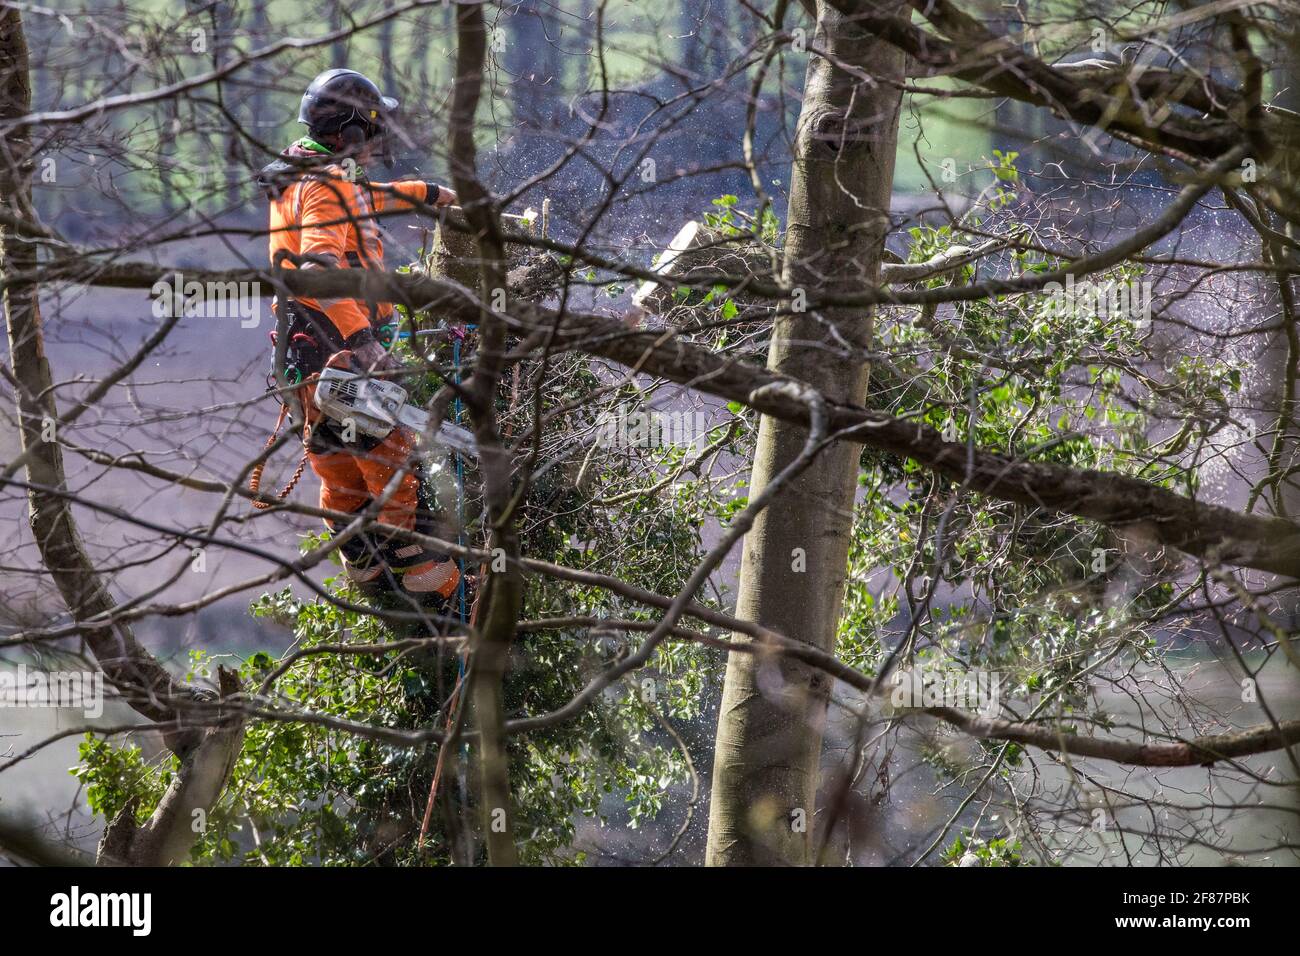 Wendover, UK. 9th April, 2021. A tree surgeon uses a chainsaw to fell a tree in Jones Hill Wood, ancient woodland said to have inspired Roald Dahl, during tree felling operations for the HS2 high-speed rail link. Tree felling work began this week, in spite of the presence of resting places and/or breeding sites for pipistrelle, barbastelle, noctule, brown long-eared and nattererÕs bats, following the issue by Natural England of a bat licence to HS2Õs contractors on 30th March. Credit: Mark Kerrison/Alamy Live News Stock Photo